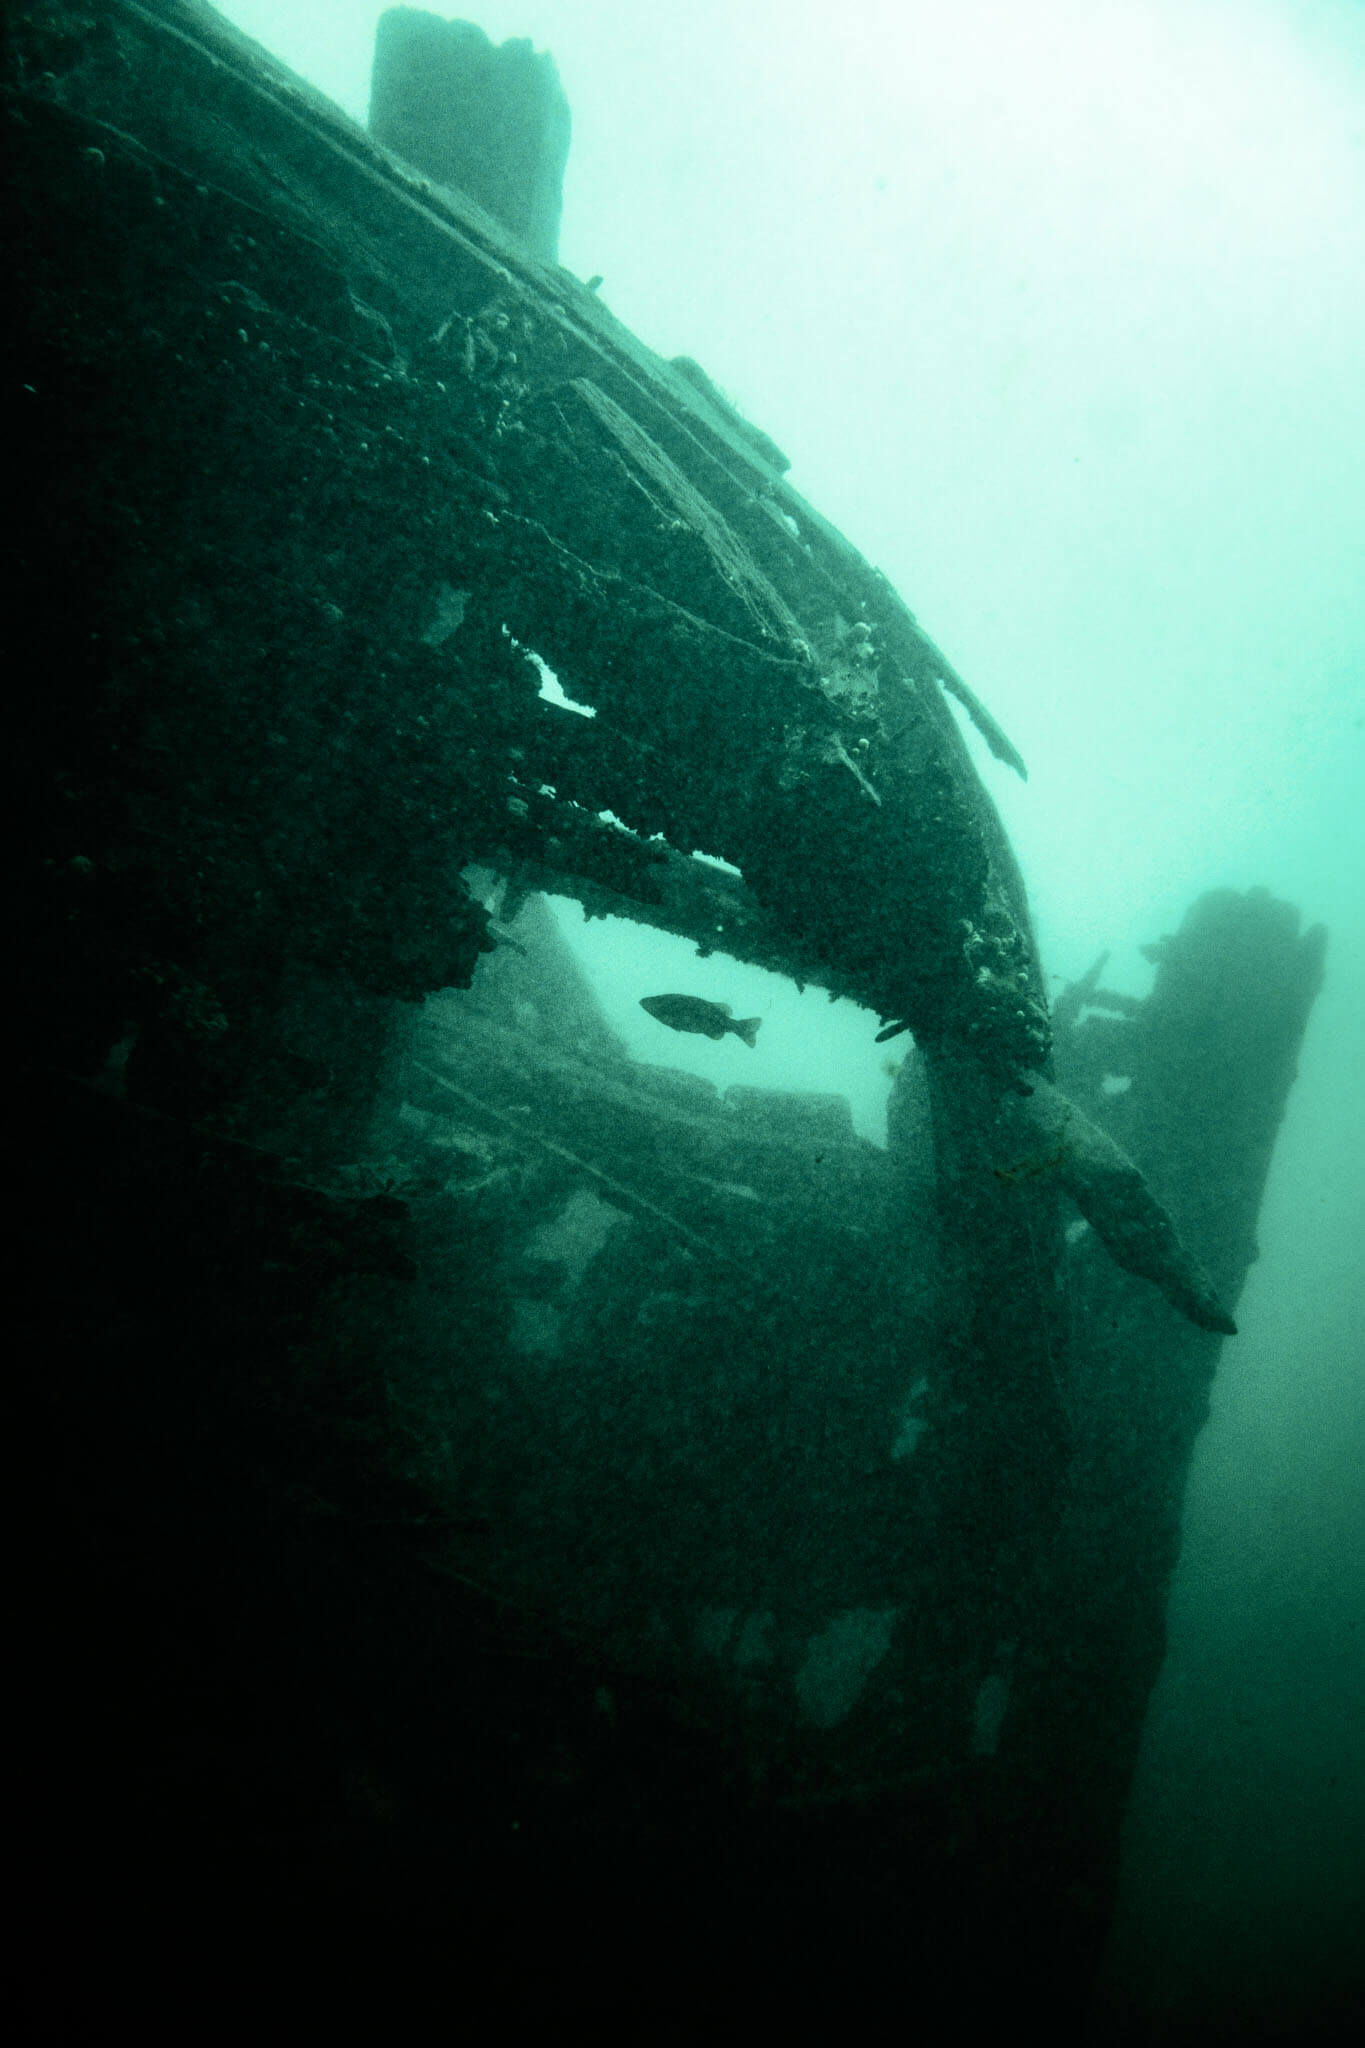 Underwater photo of the Robert Gaskin shipwreck in the St. Lawerence river